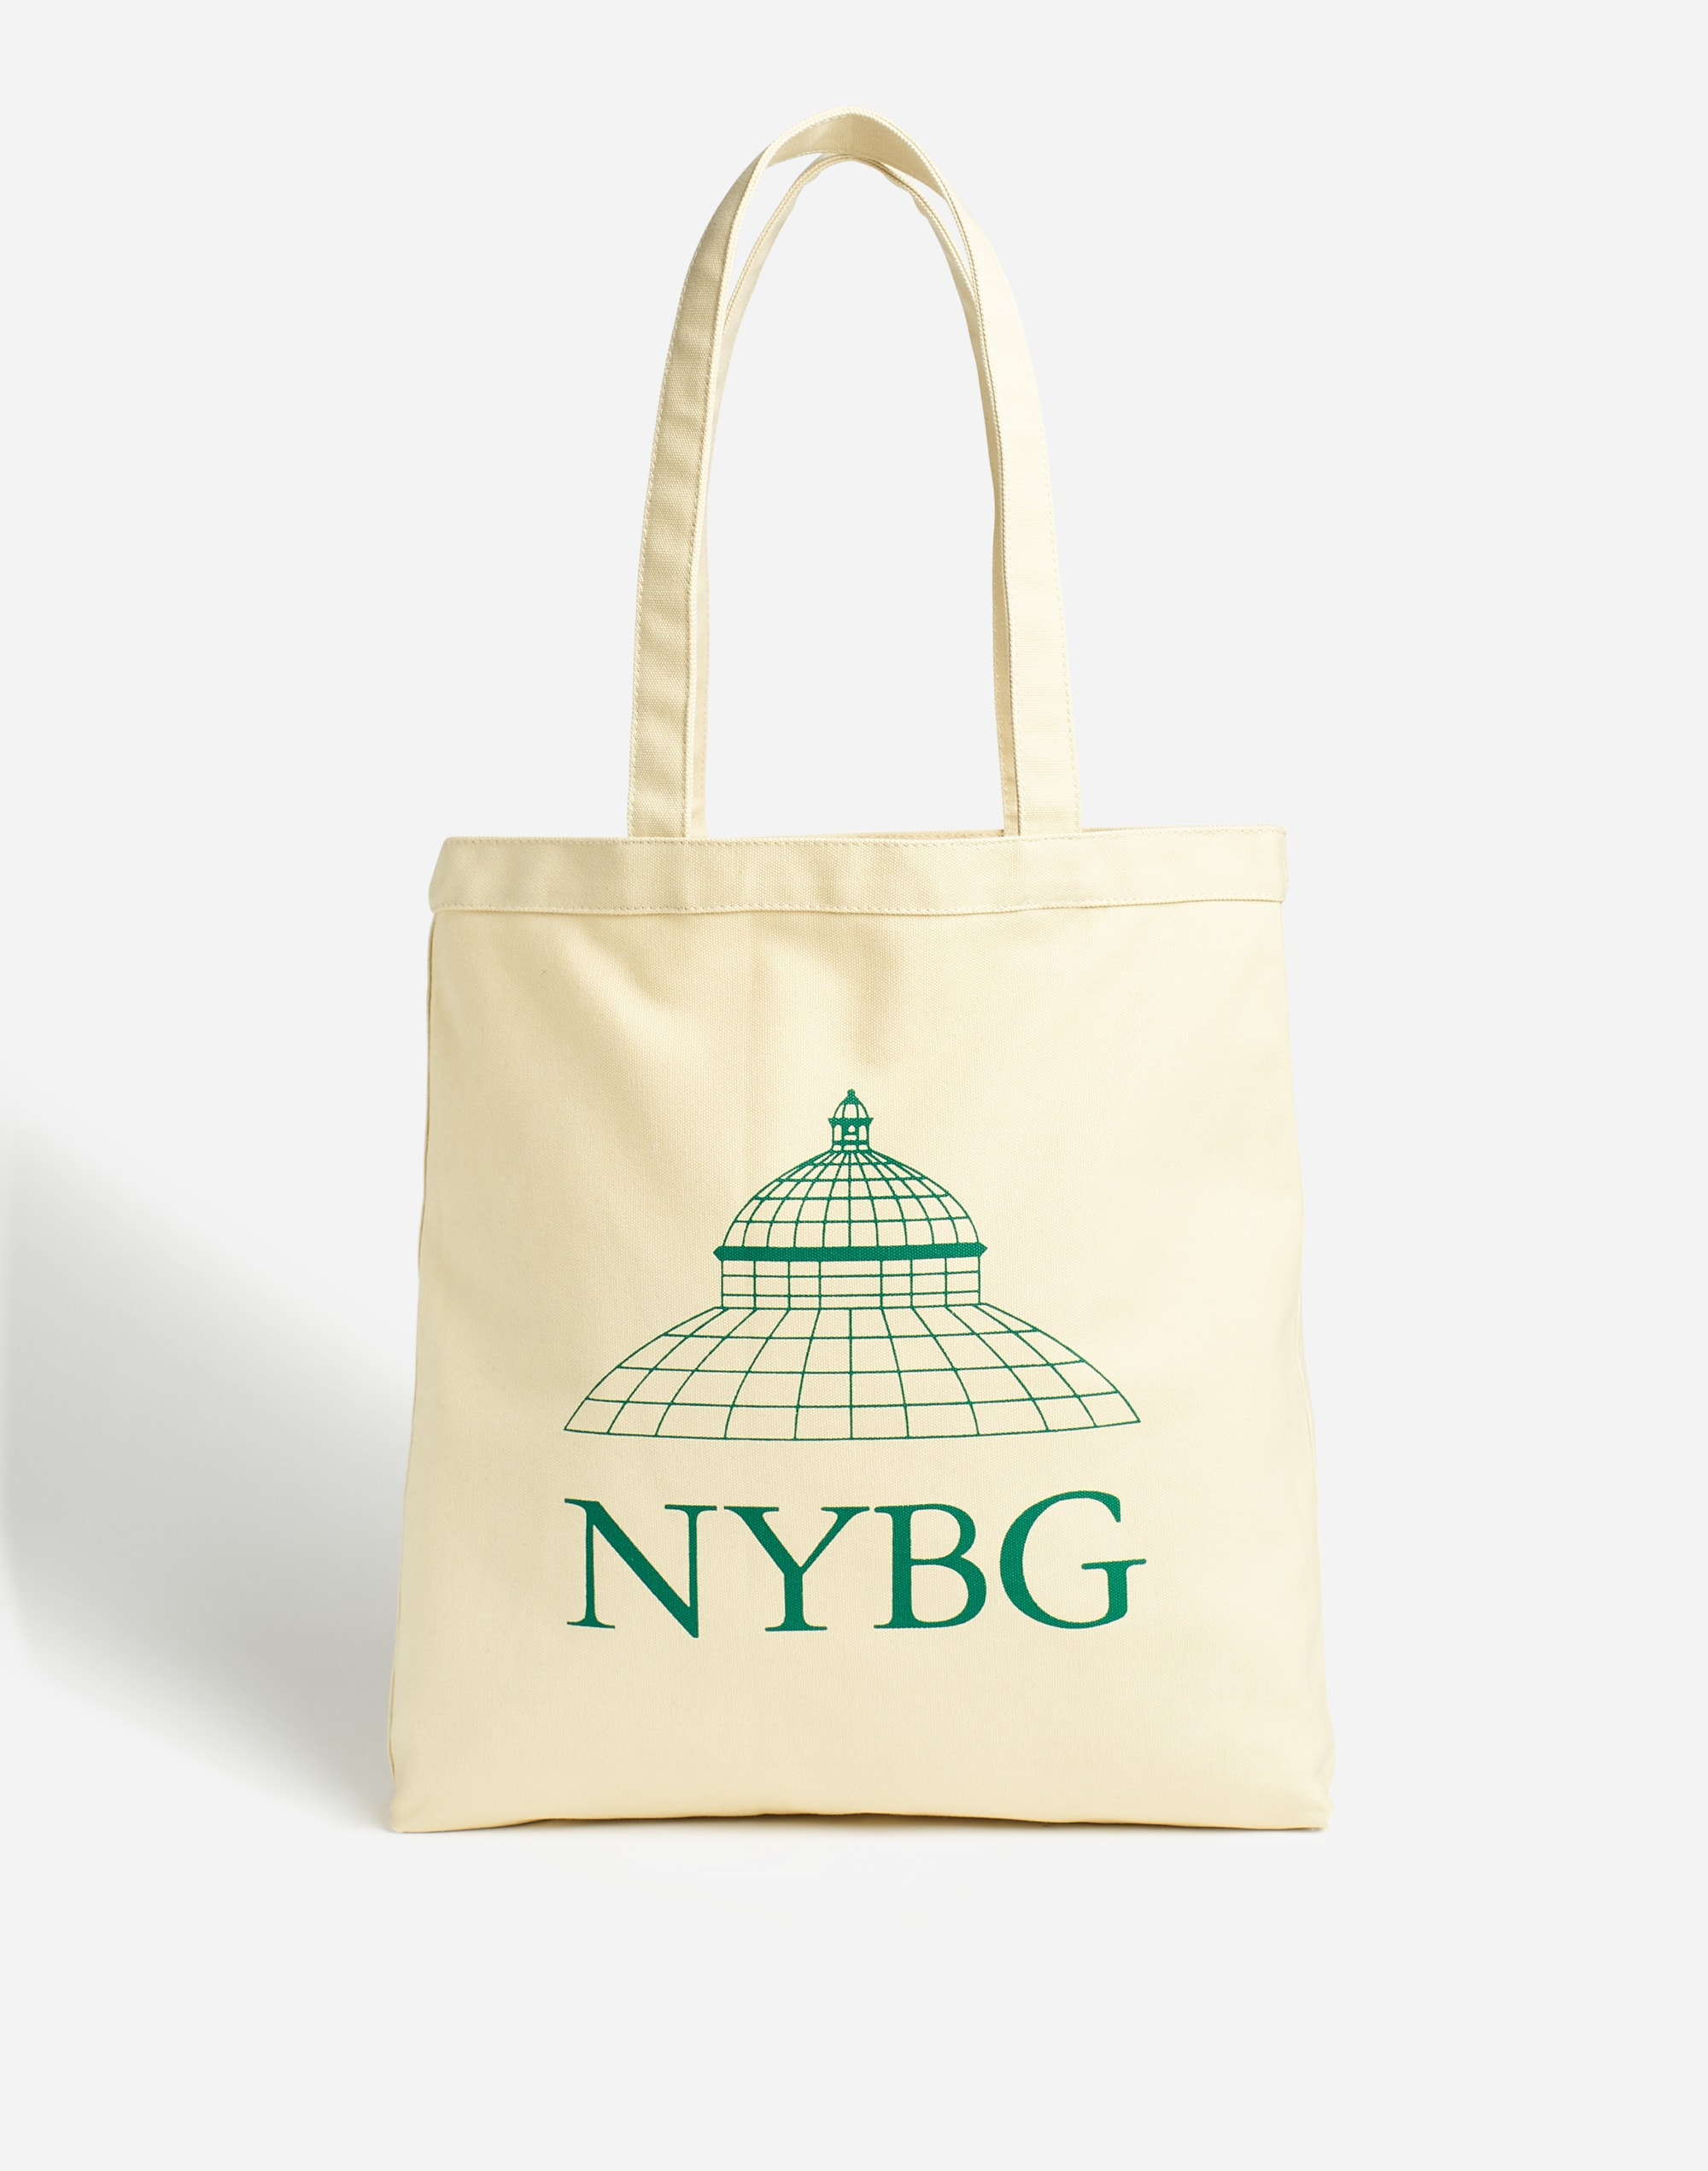 Madewell x NYBG Graphic Tote